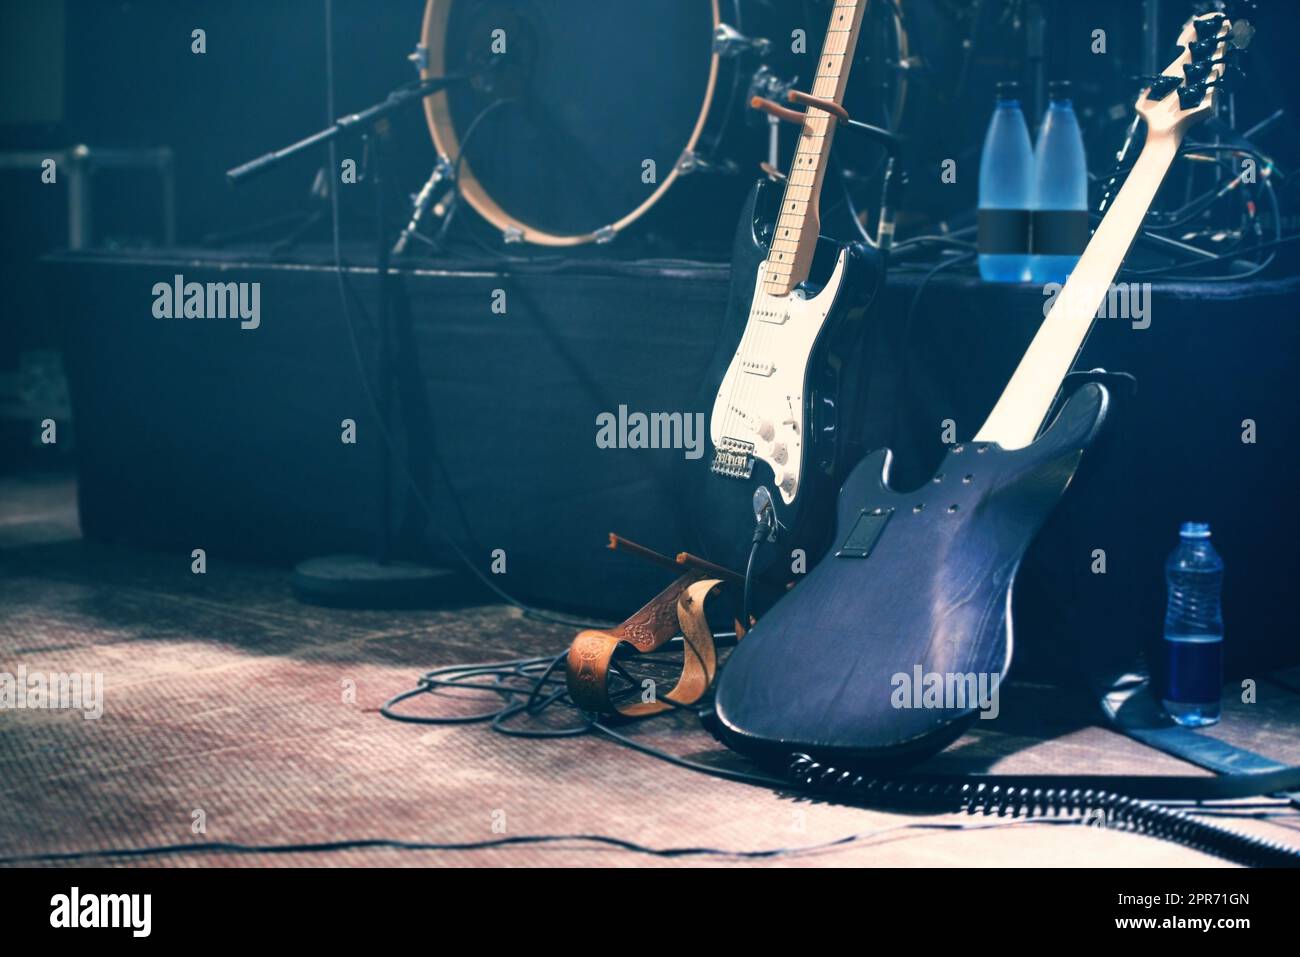 Waiting to be played. Musical instruments on an empty stage before a show. Stock Photo